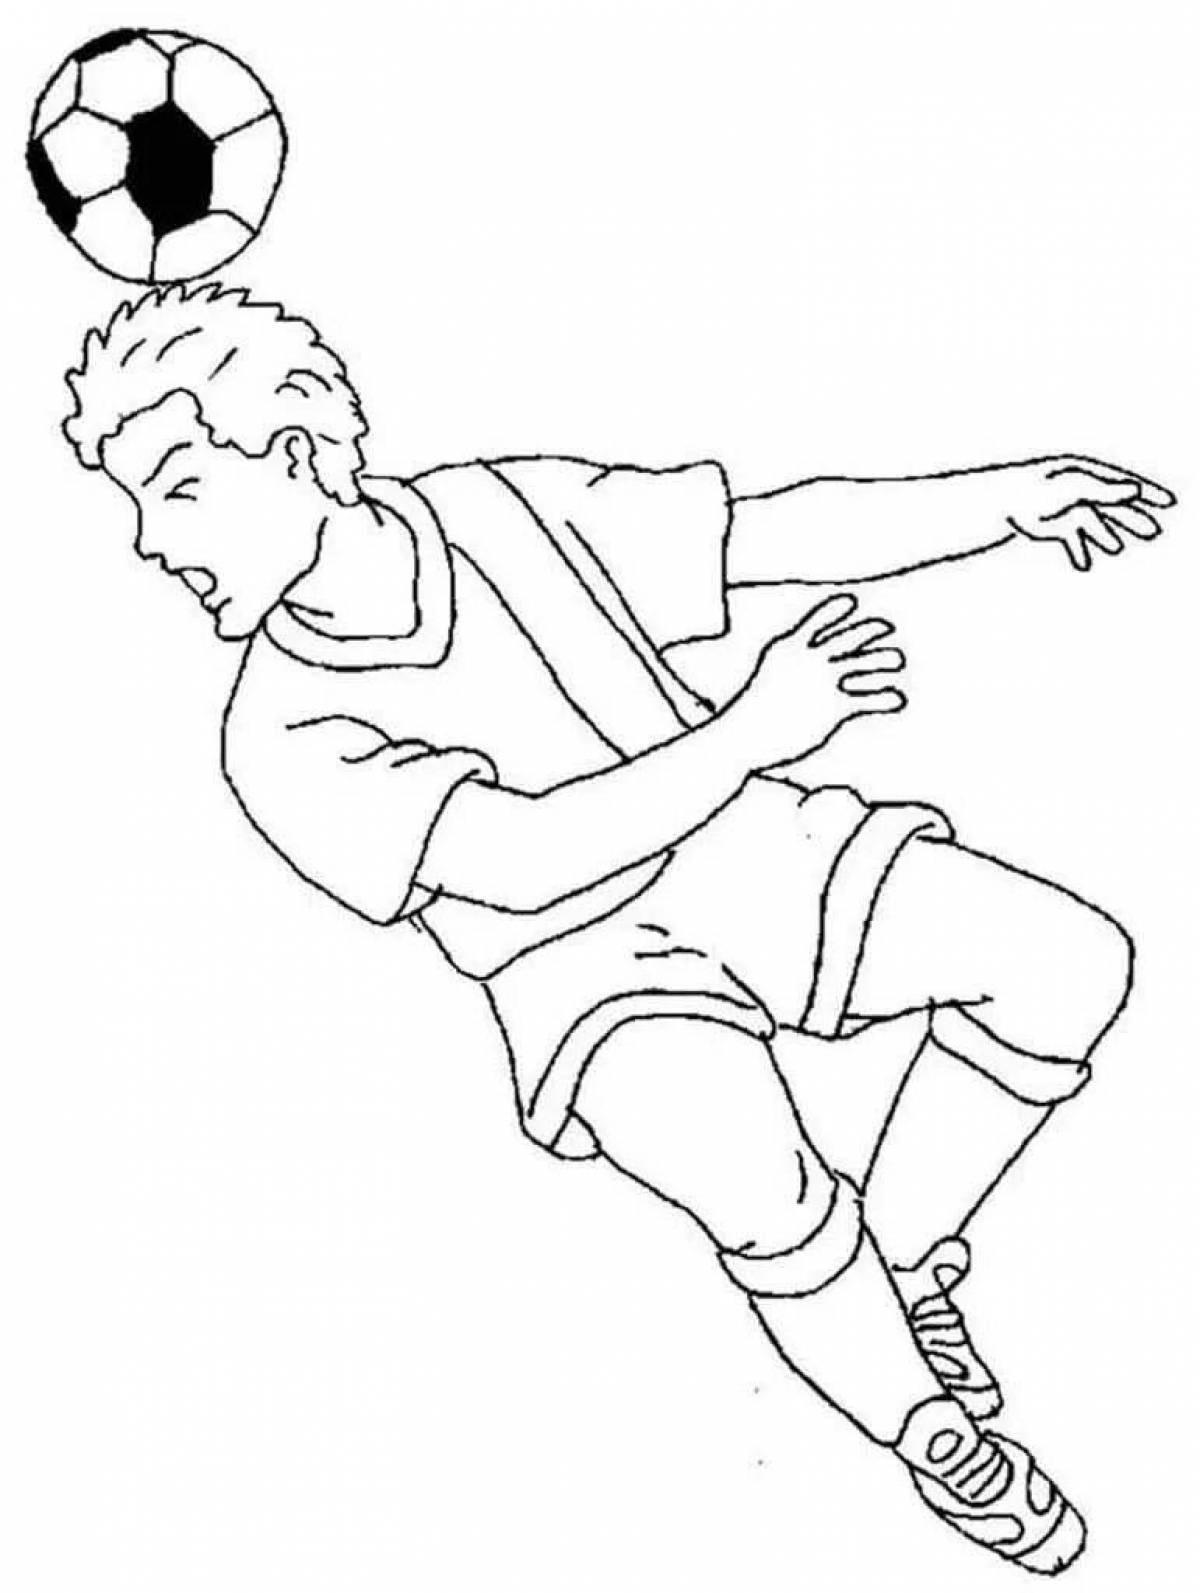 Slick soccer player with ball